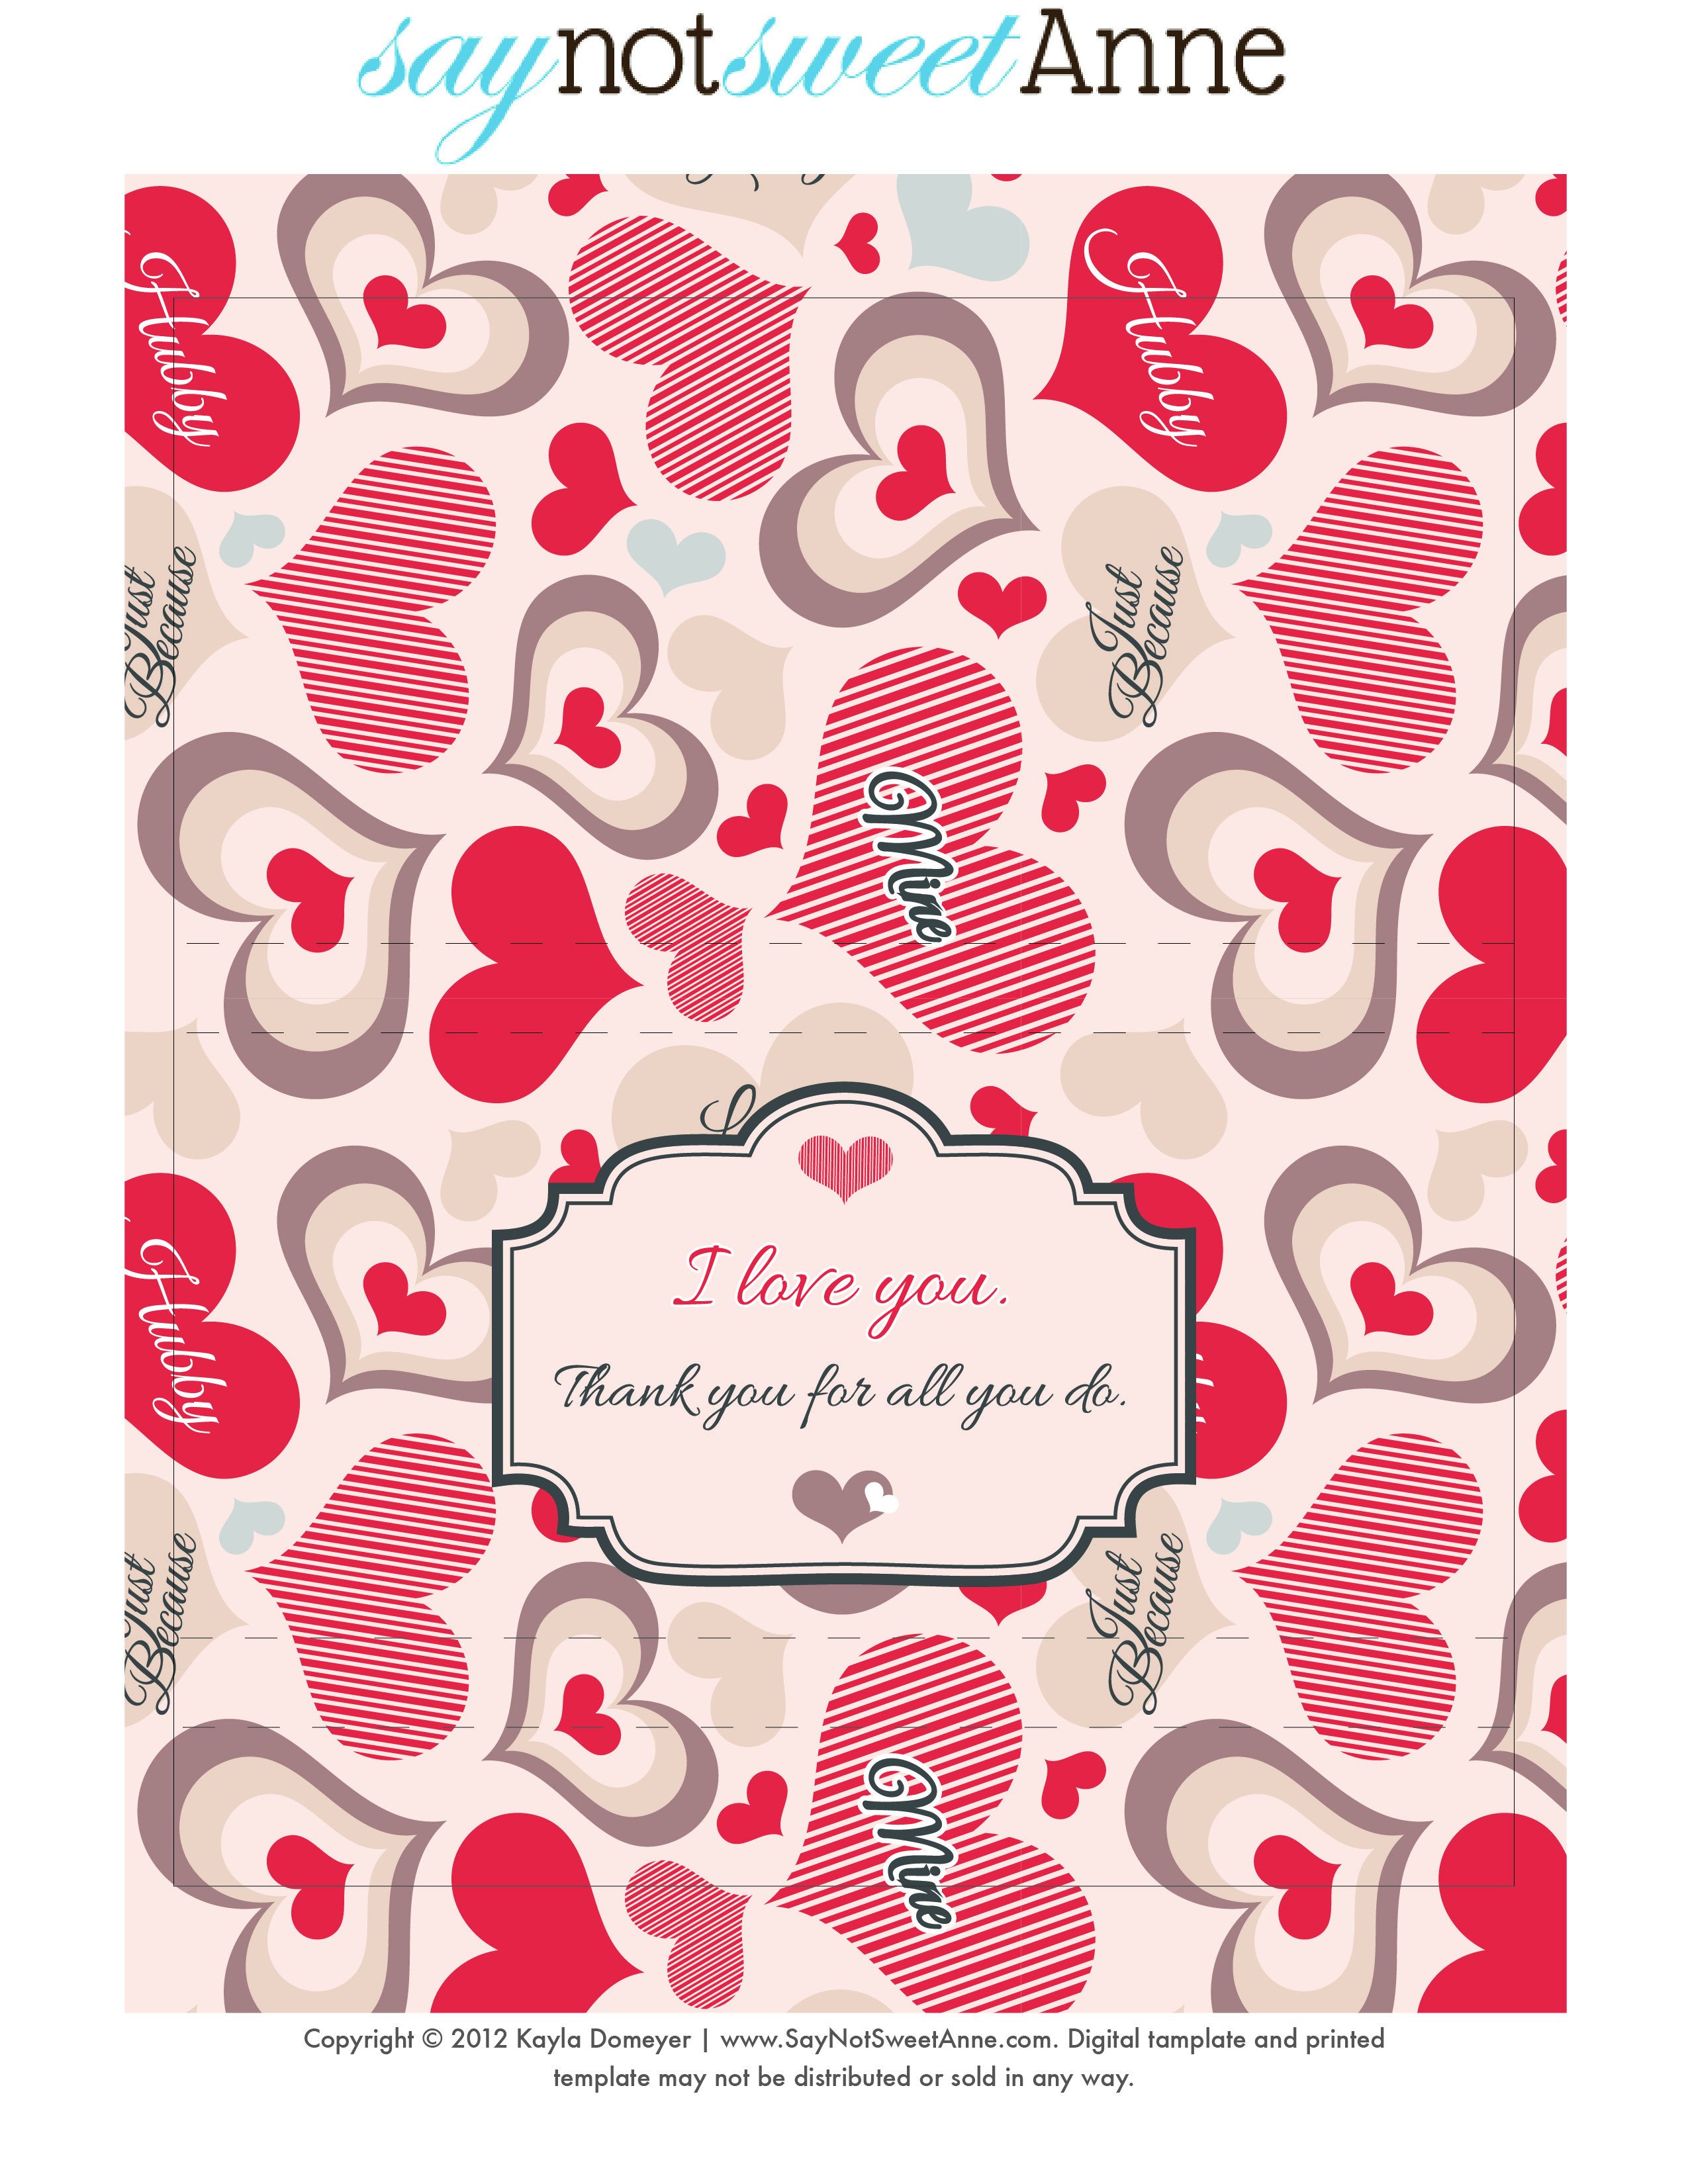 Just Because Candy [Free Printable] Sweet Anne Designs